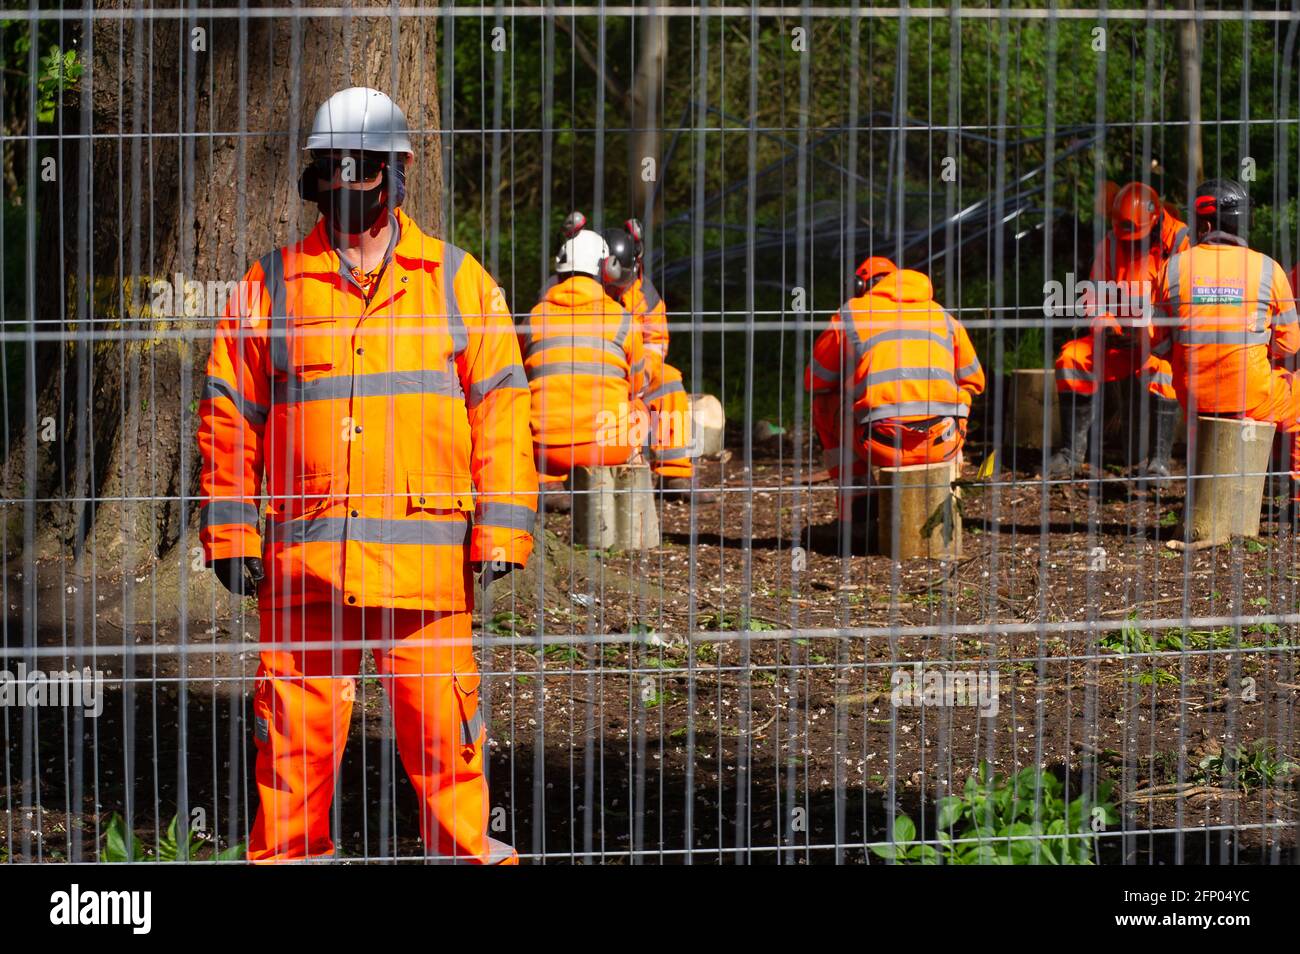 Aylesbury, Buckinghamshire, UK. 19th May, 2021. HS2 tree fellers sit on tree stumps felled by them. Local residents and Stop HS2 campaigners were peacefully protesting in Aylesbury today against the High Speed 2 rail which is causing a huge amount of destruction throughout Buckinghamshire. Credit: Maureen McLean/Alamy Stock Photo